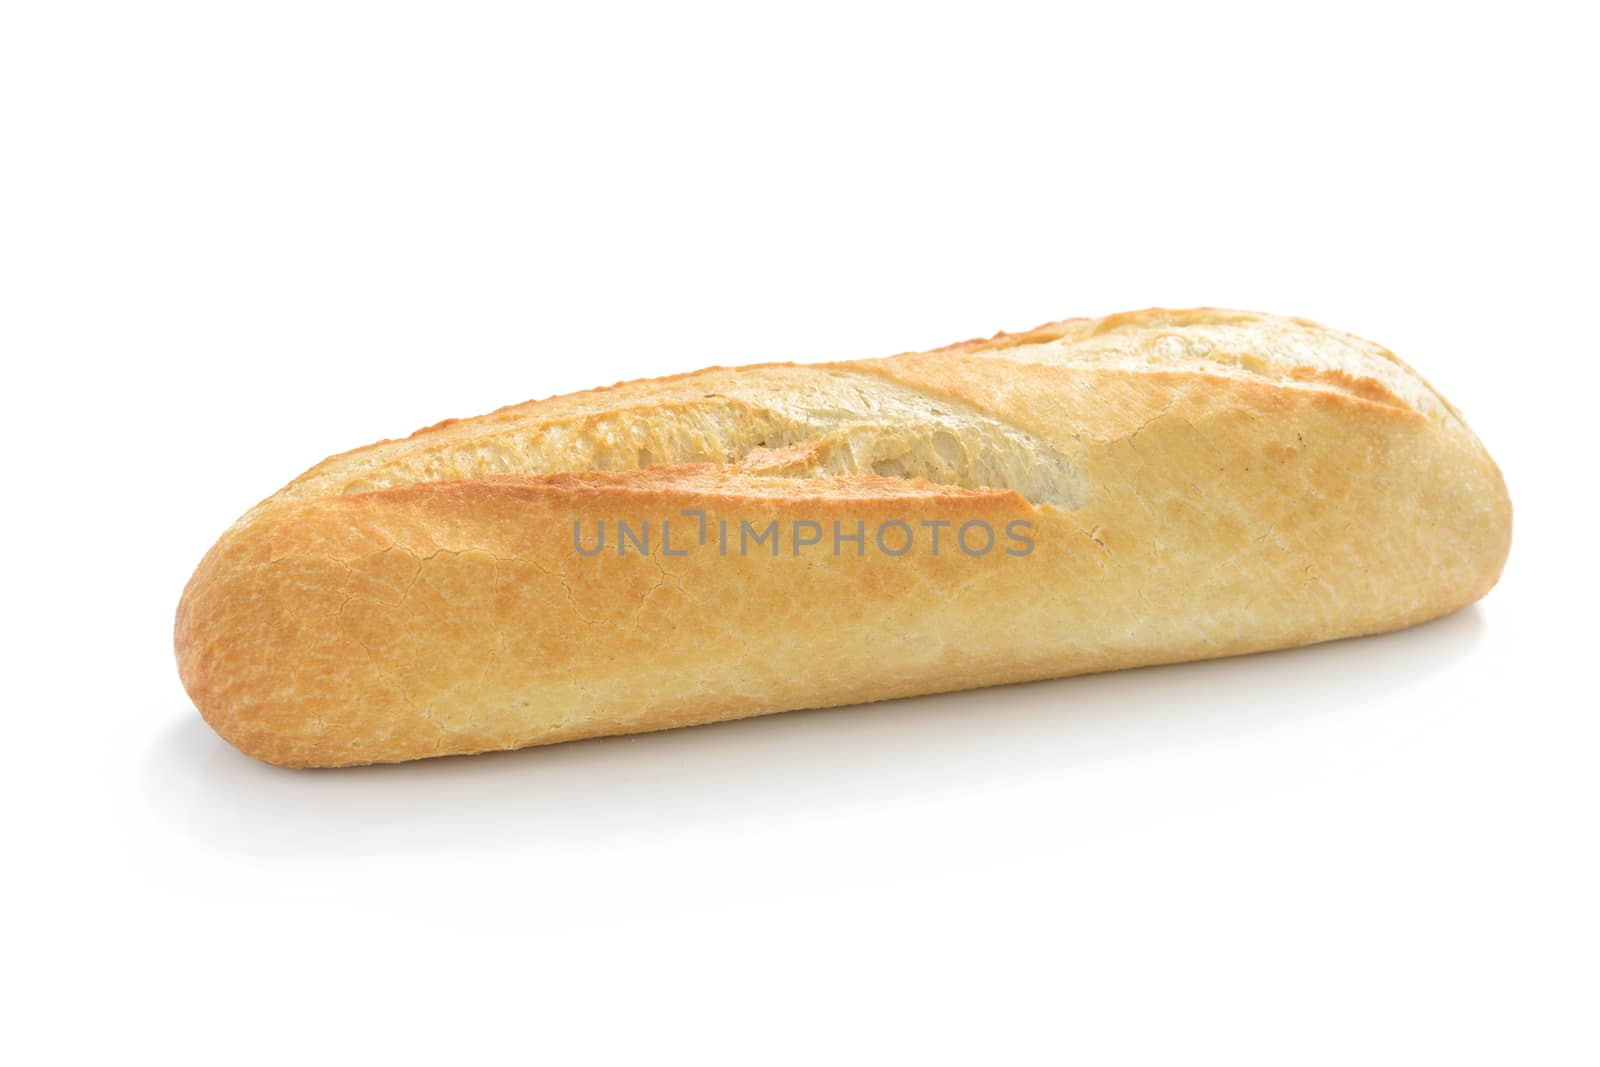 French mini baguette isolated on white background in close-up